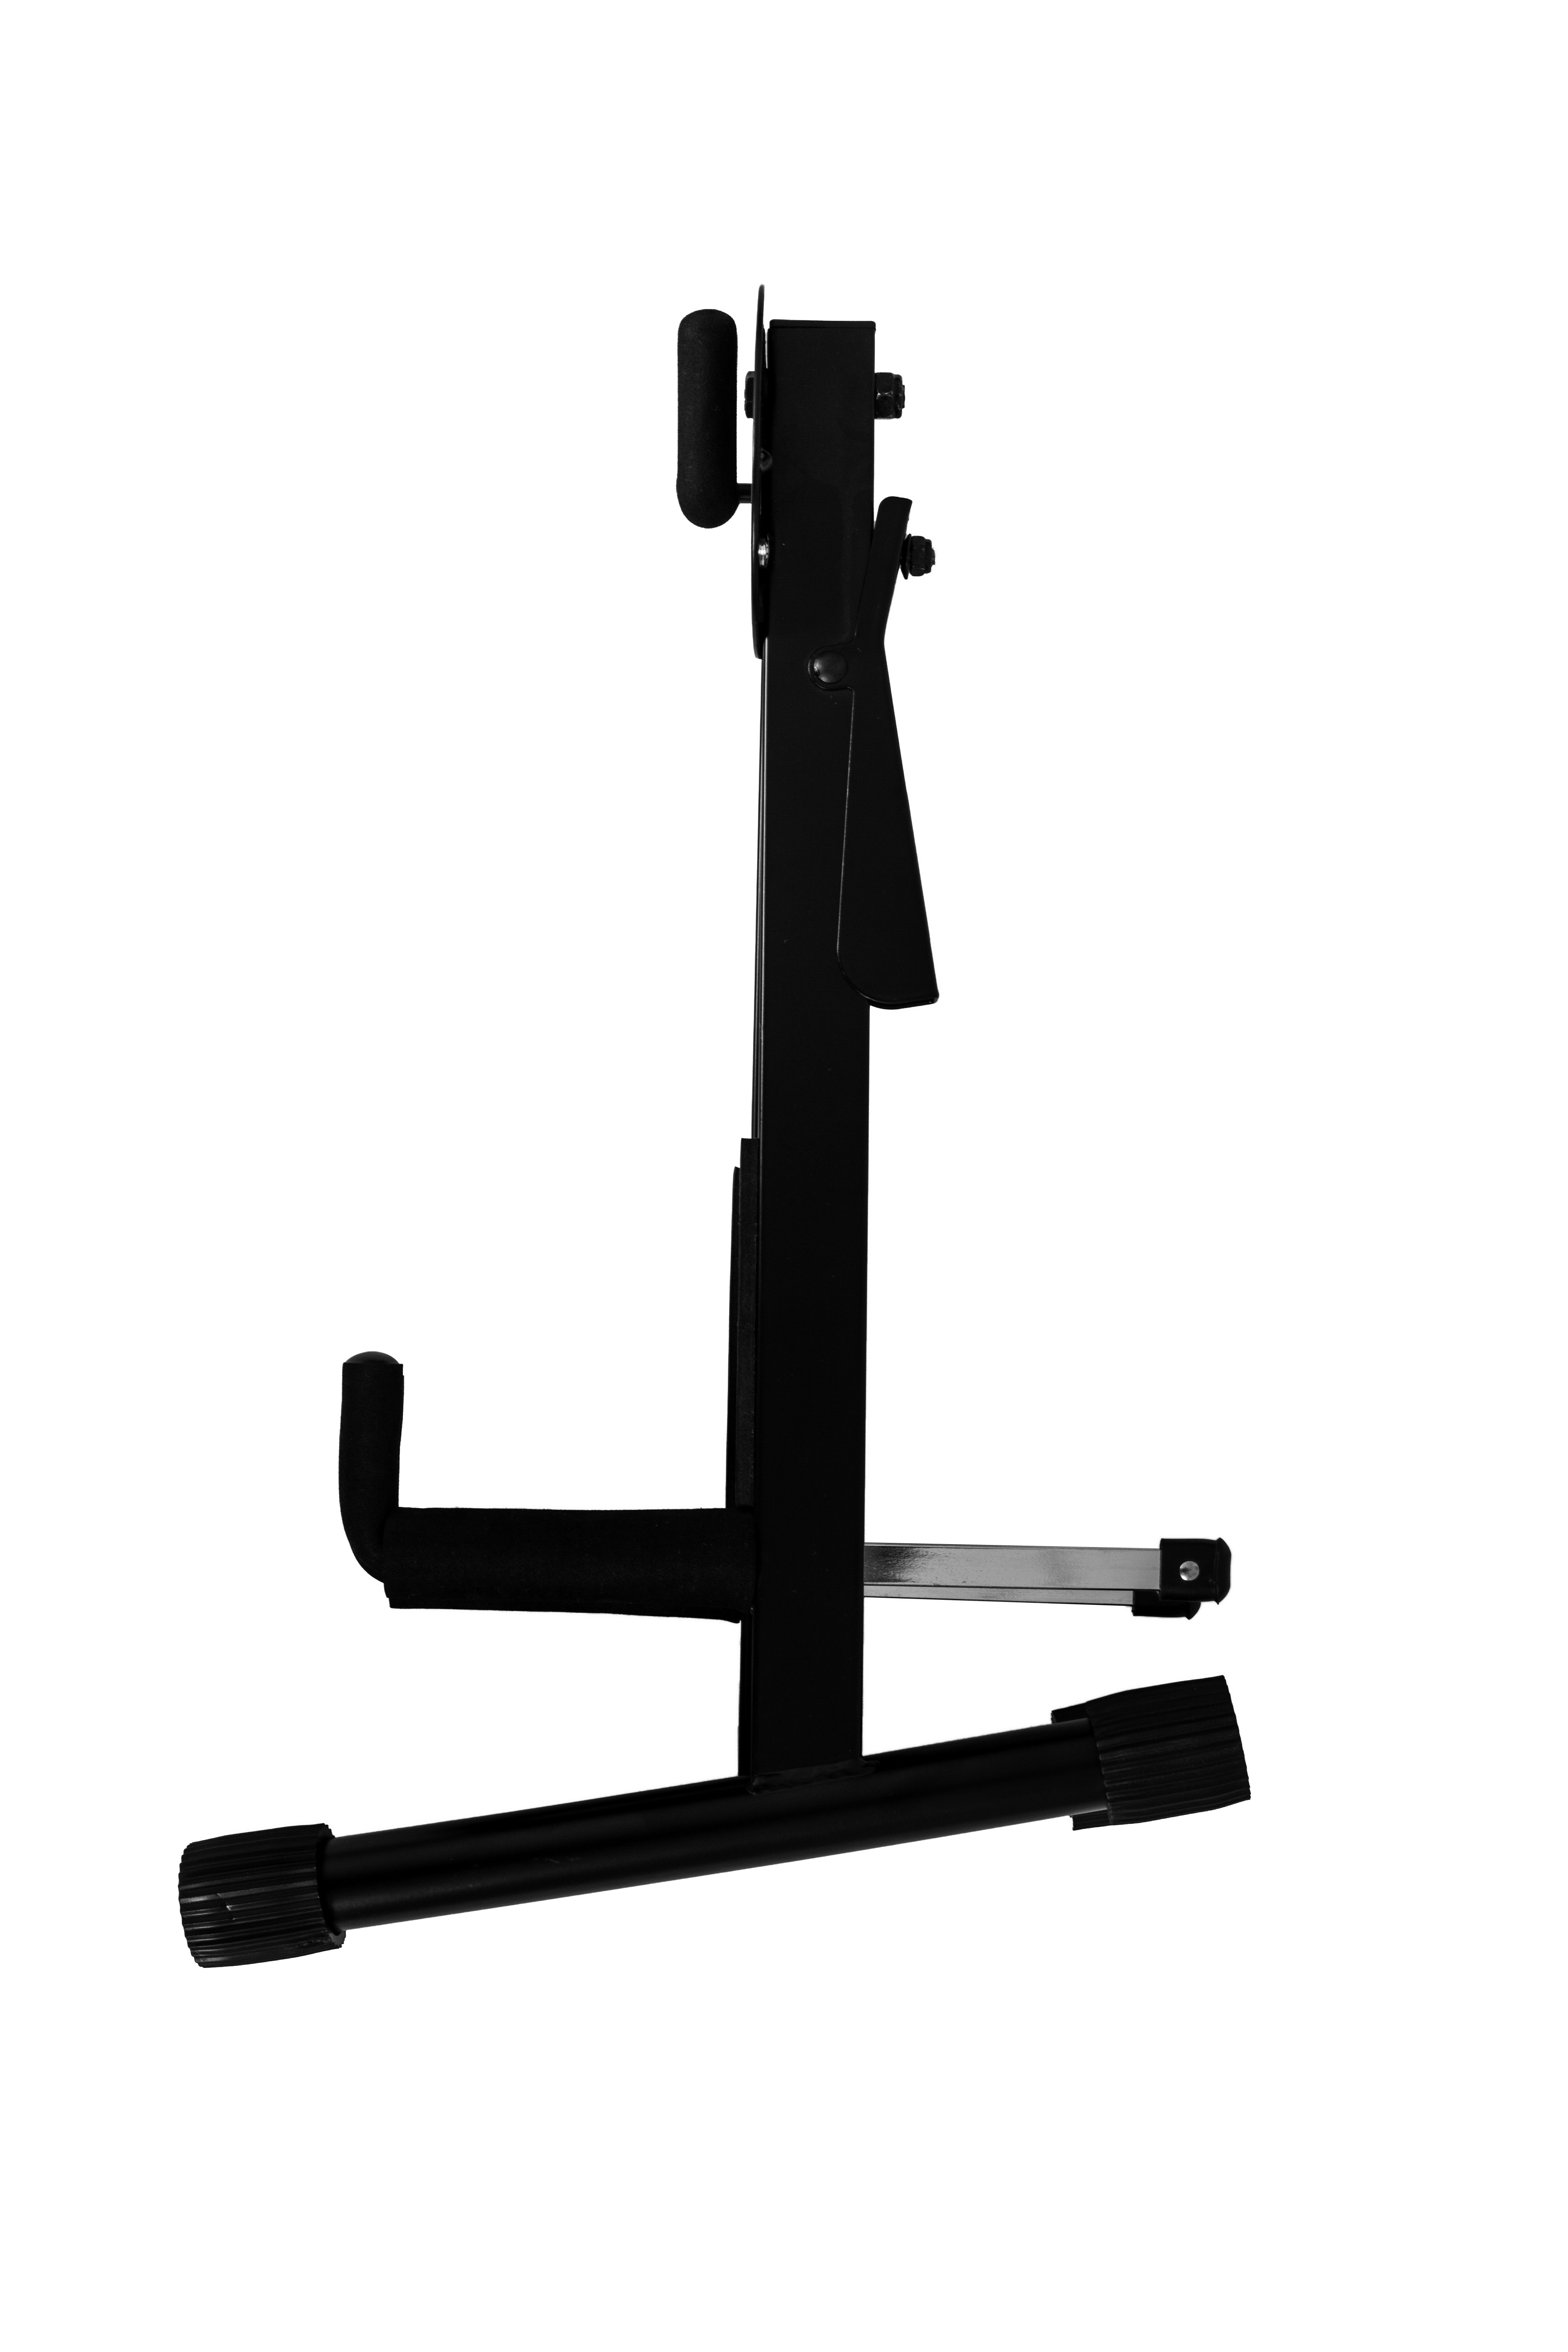 Nomad NGS-2536 A-Frame Guitar Stand